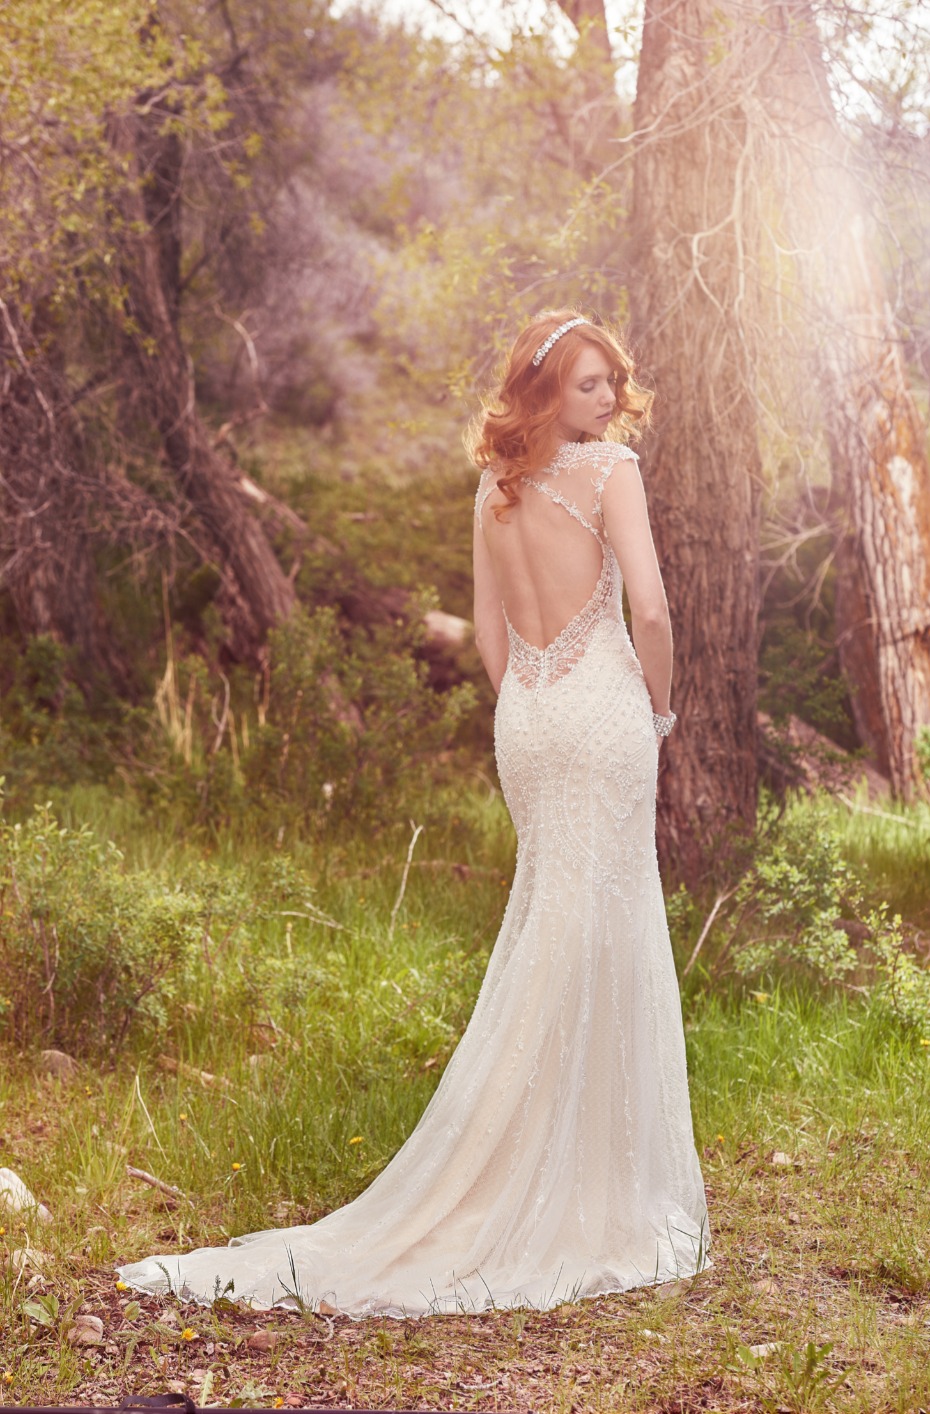 RSVP to the Maggie Sottero Trunk Show Now